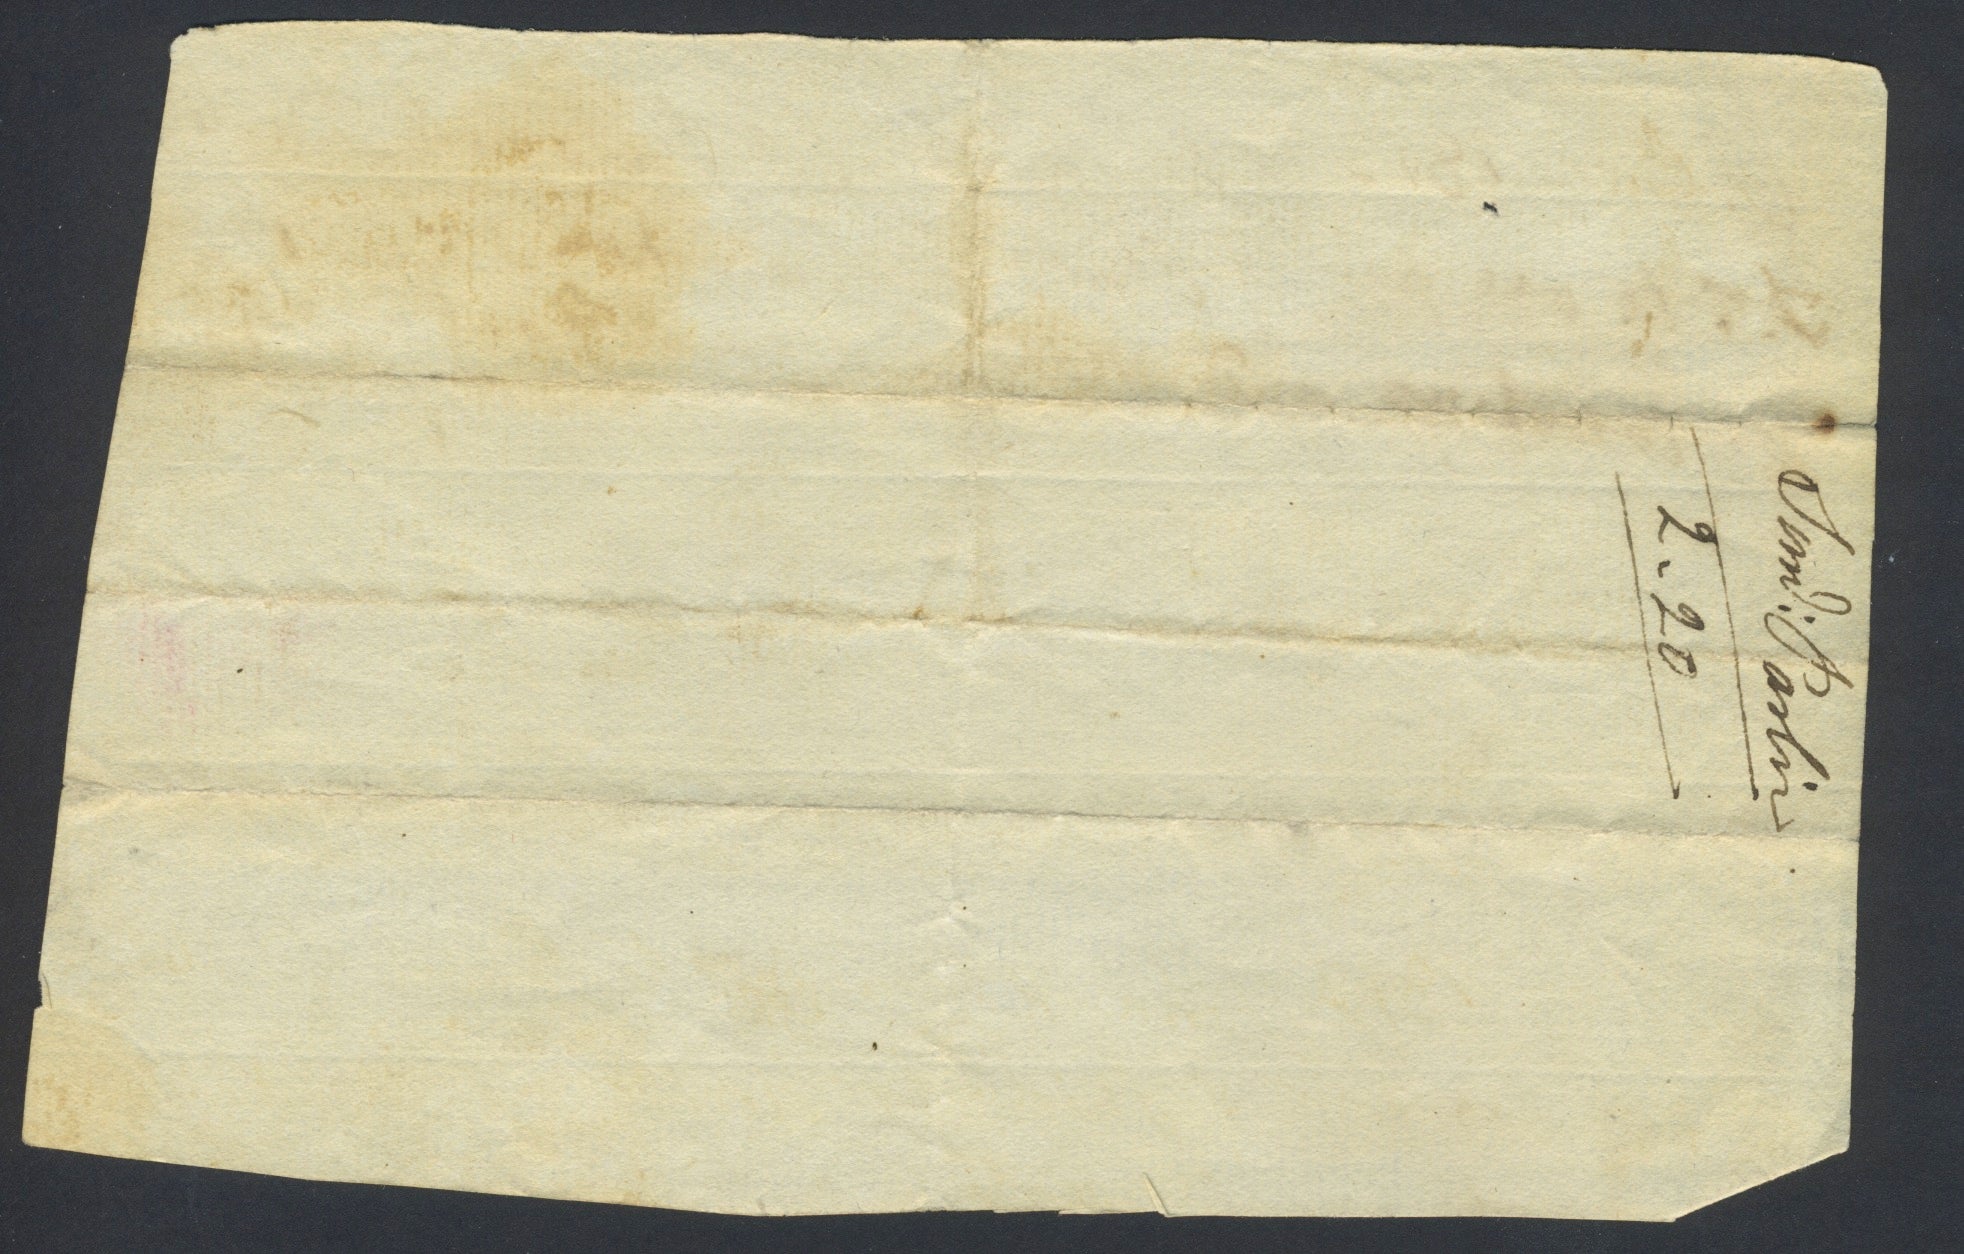 Autograph Tailor's Bill, 1813 Ink on paper. Acton [MA], 1813.